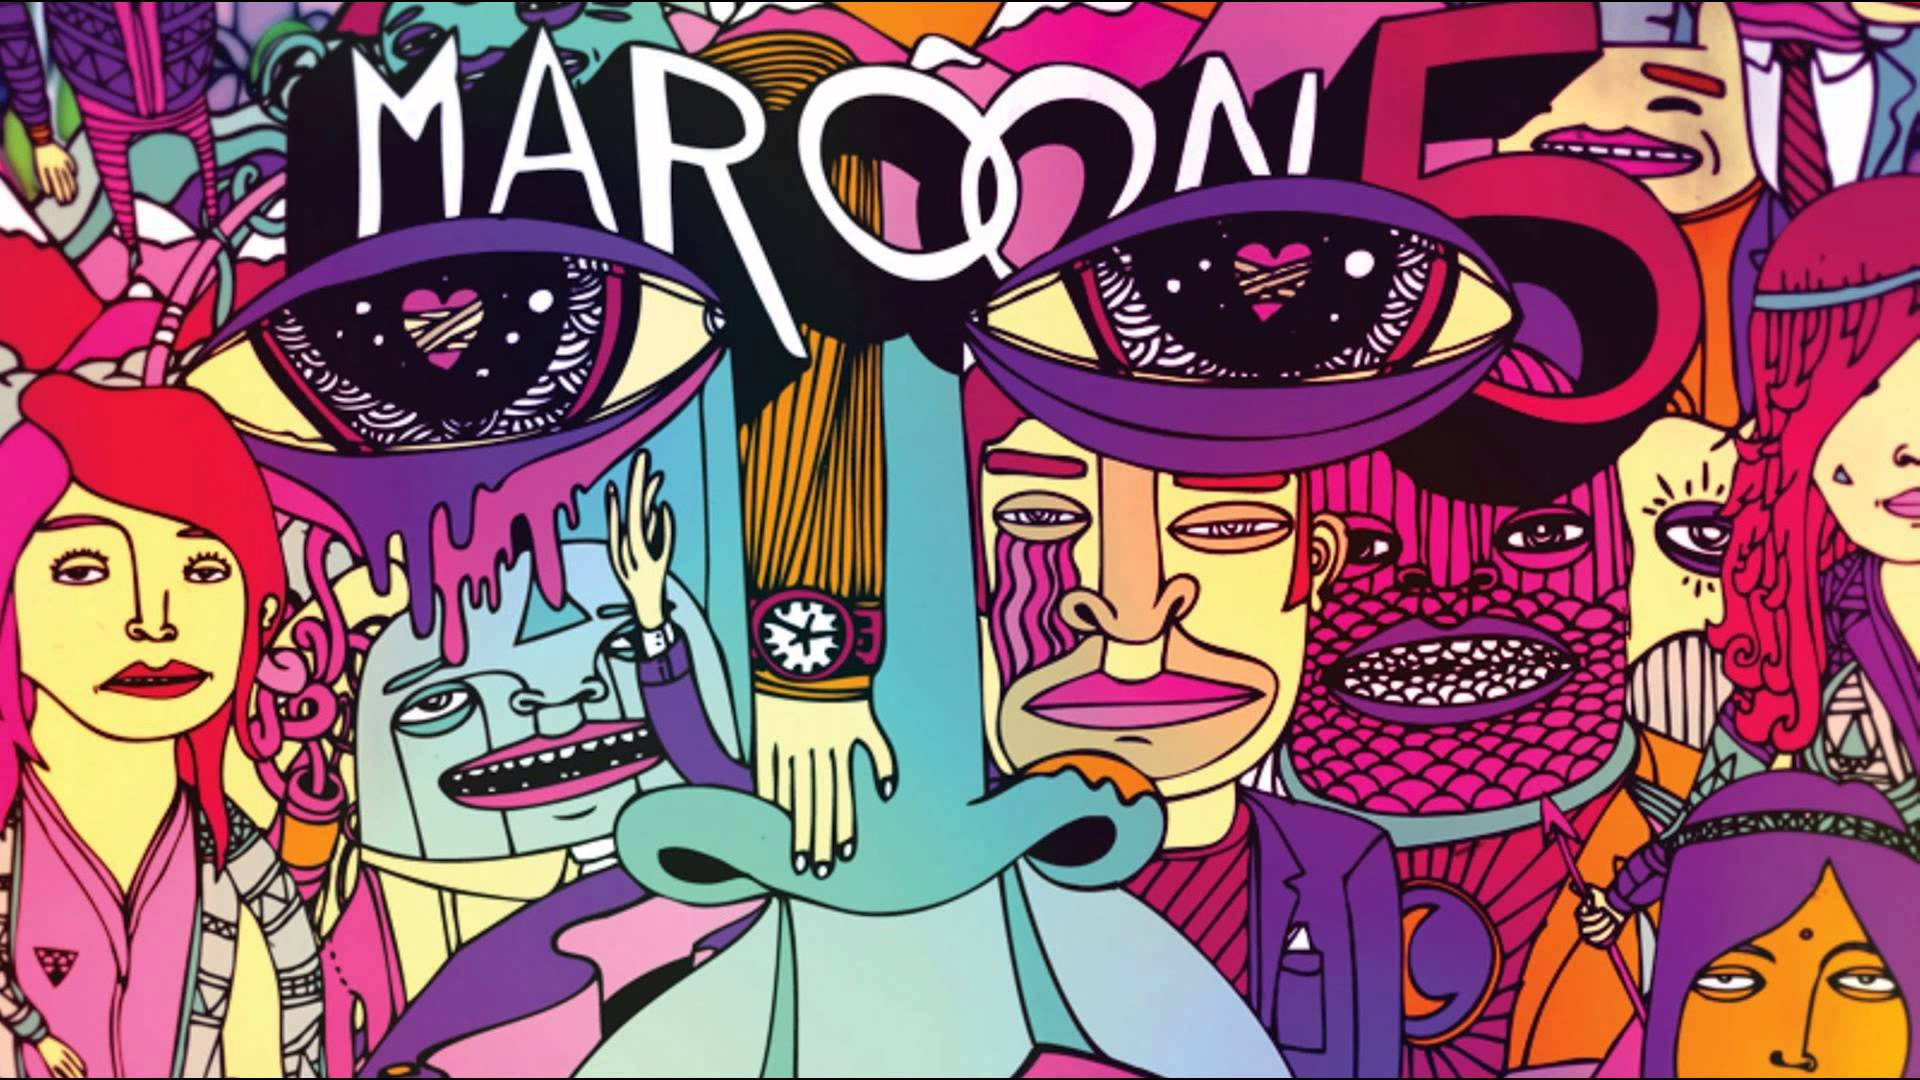 Free Maroon 5 Pictures , [100+] Maroon 5 Pictures for FREE 